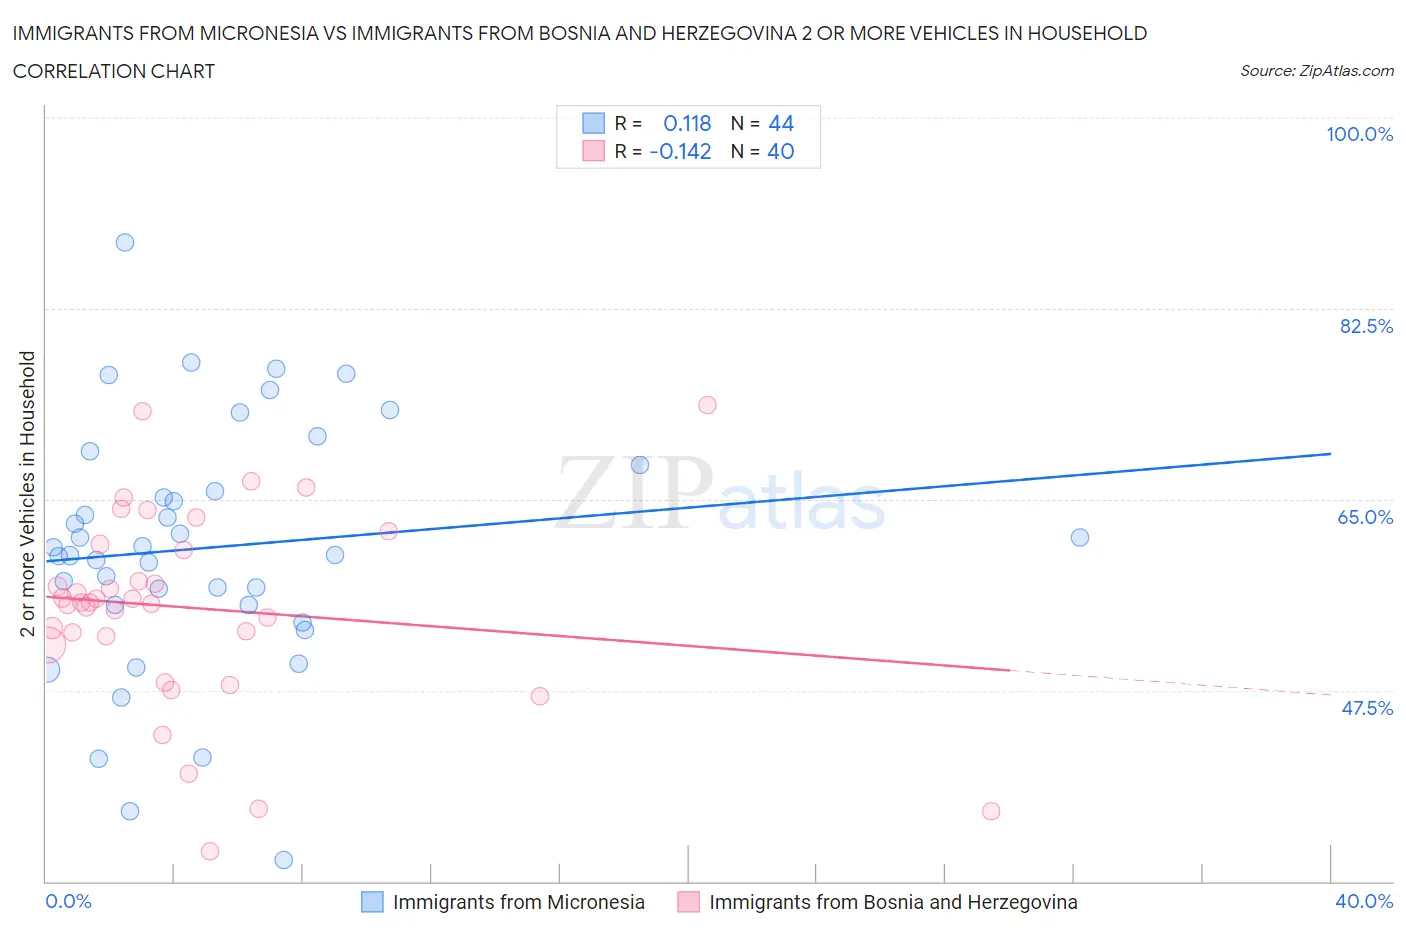 Immigrants from Micronesia vs Immigrants from Bosnia and Herzegovina 2 or more Vehicles in Household